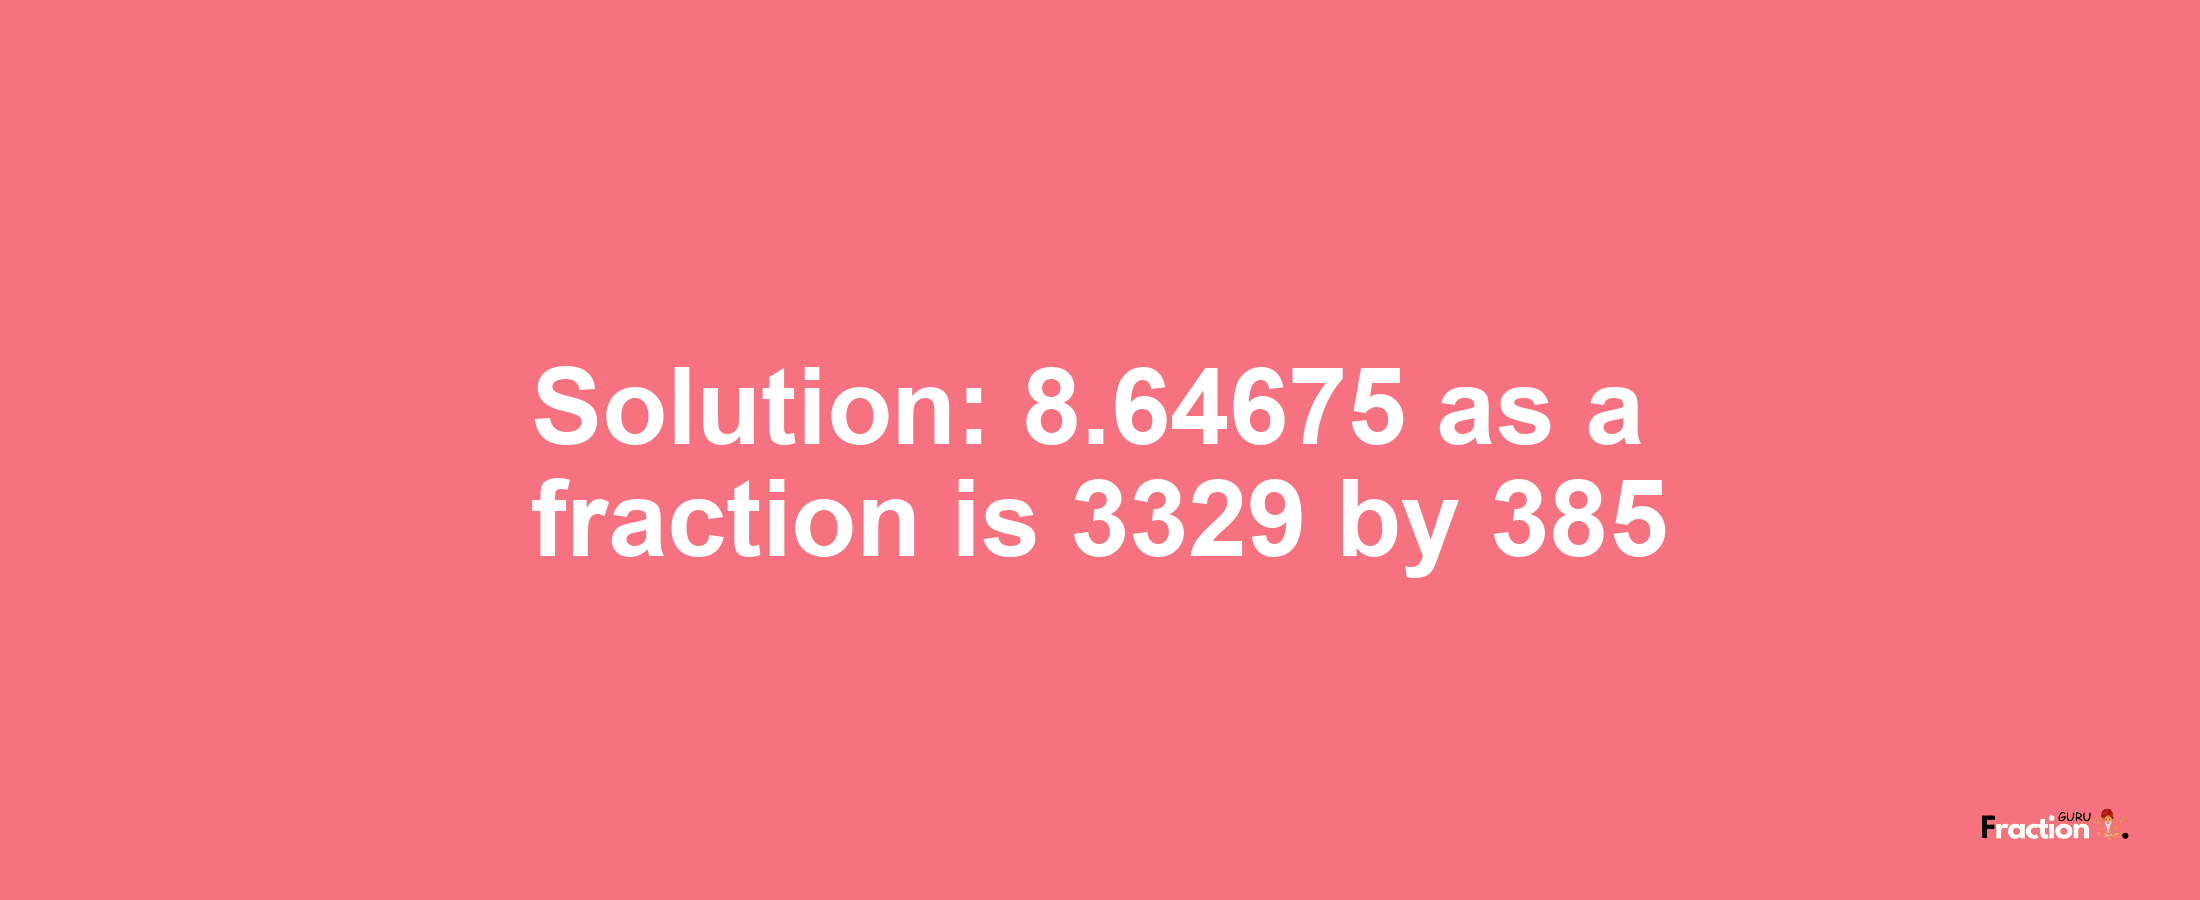 Solution:8.64675 as a fraction is 3329/385